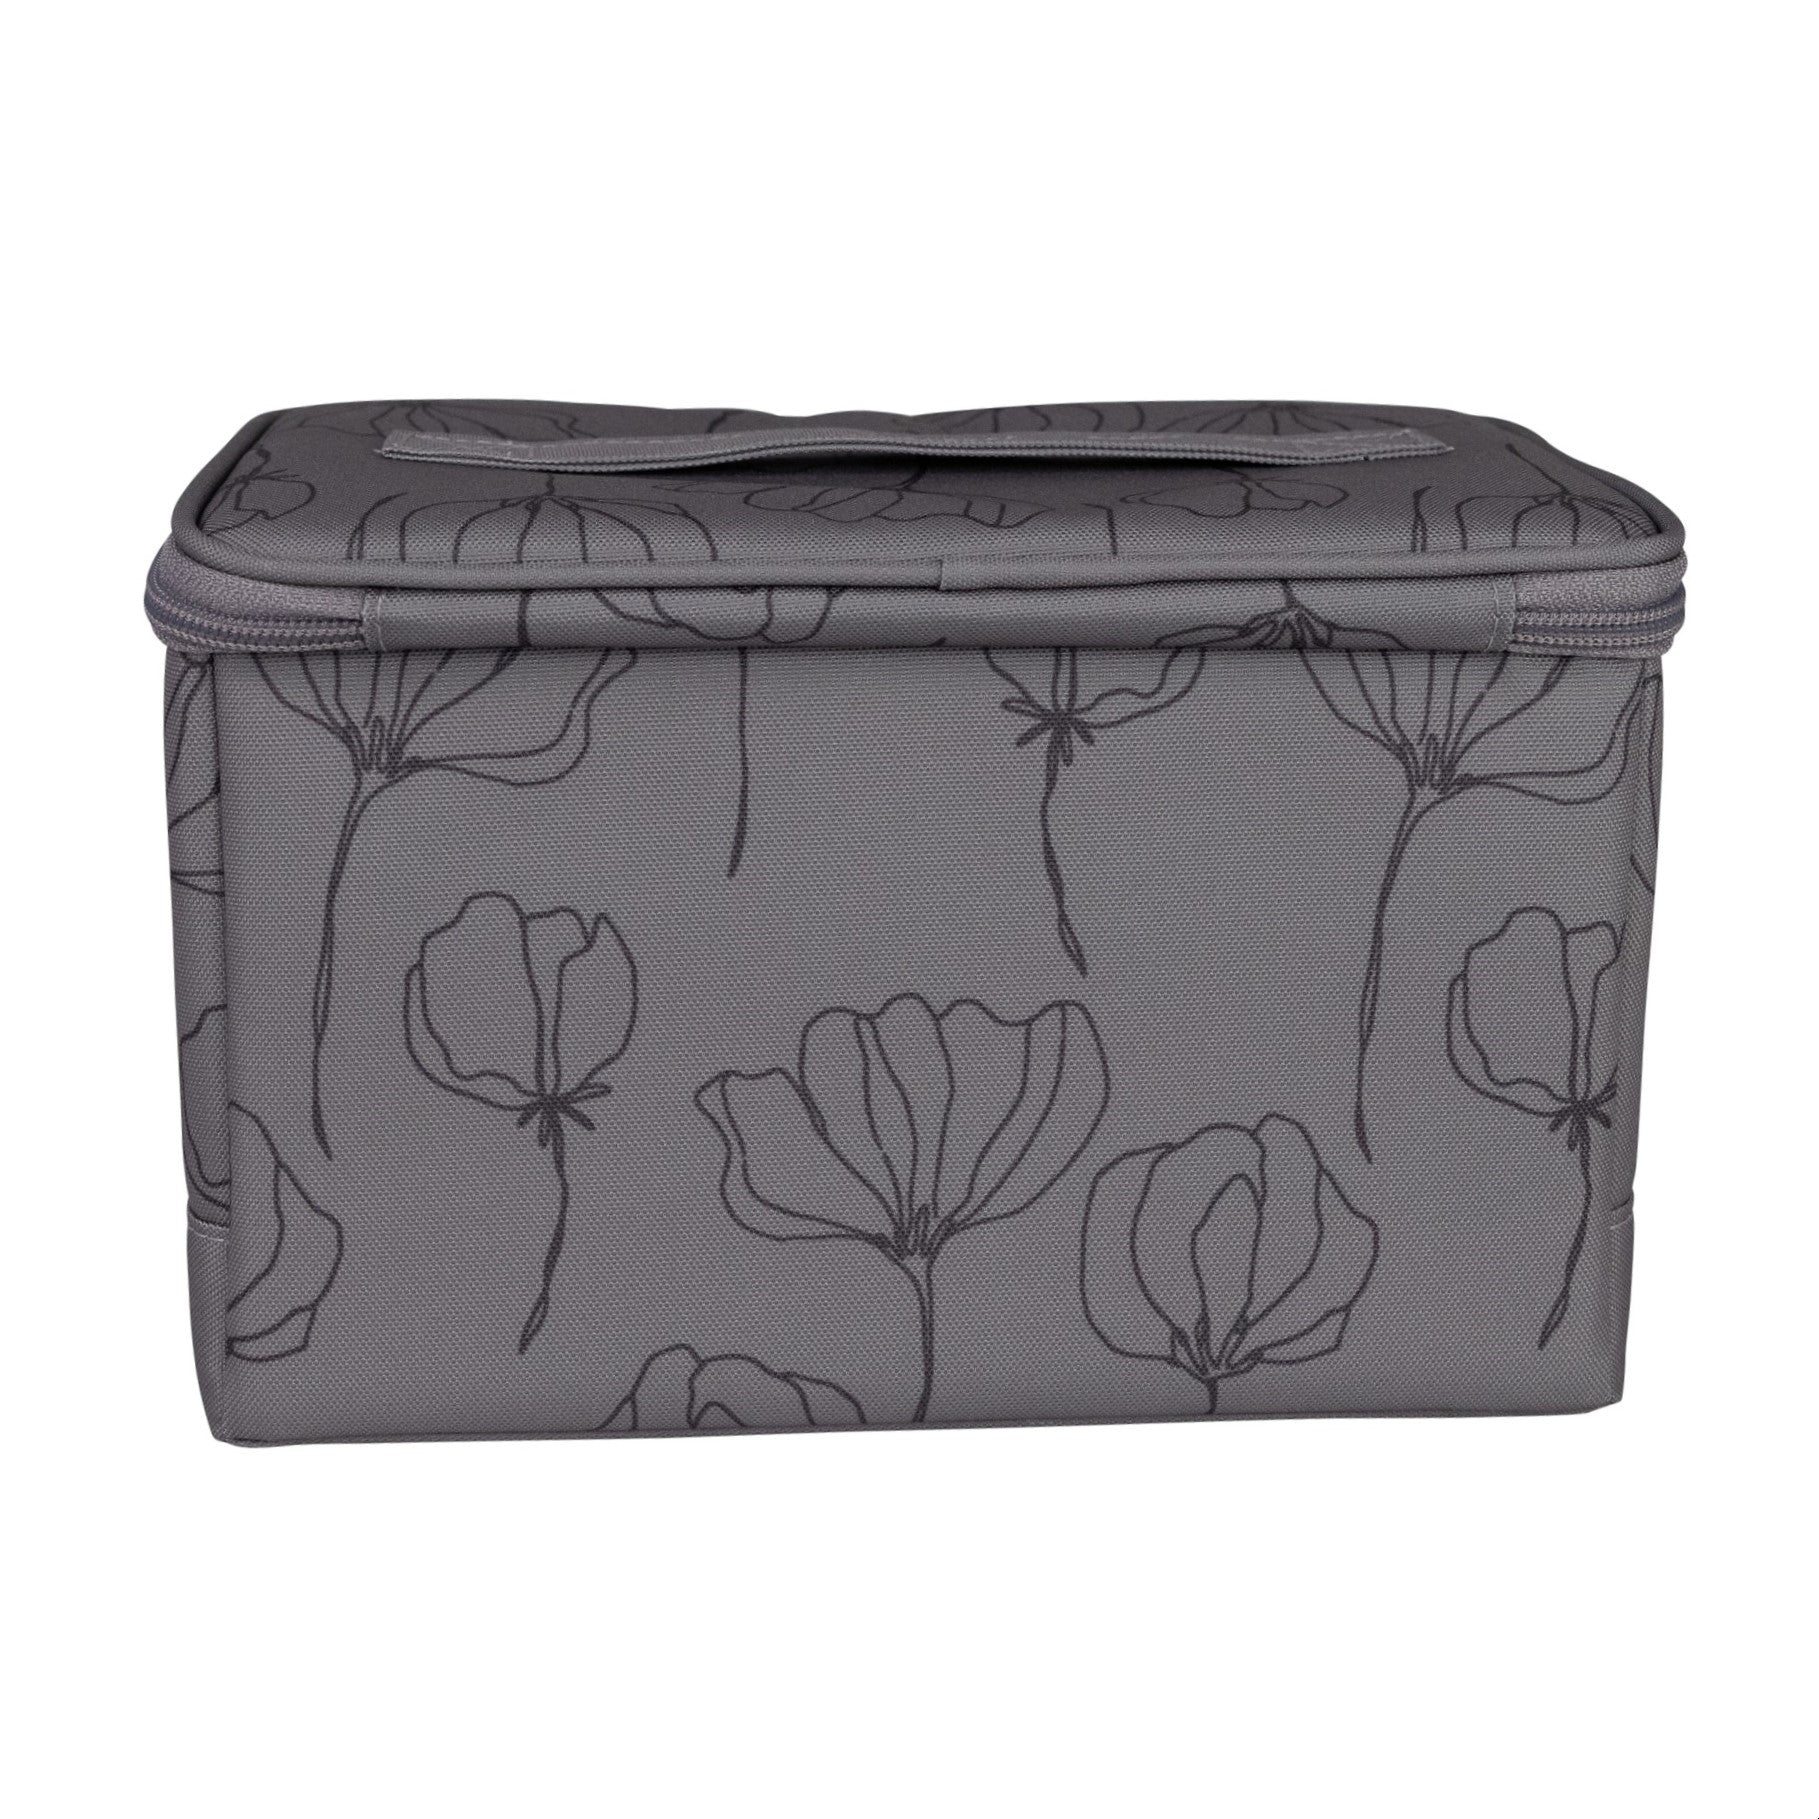 Everything Mary Collapsible Sewing Kit Organizer Box, Black Floral